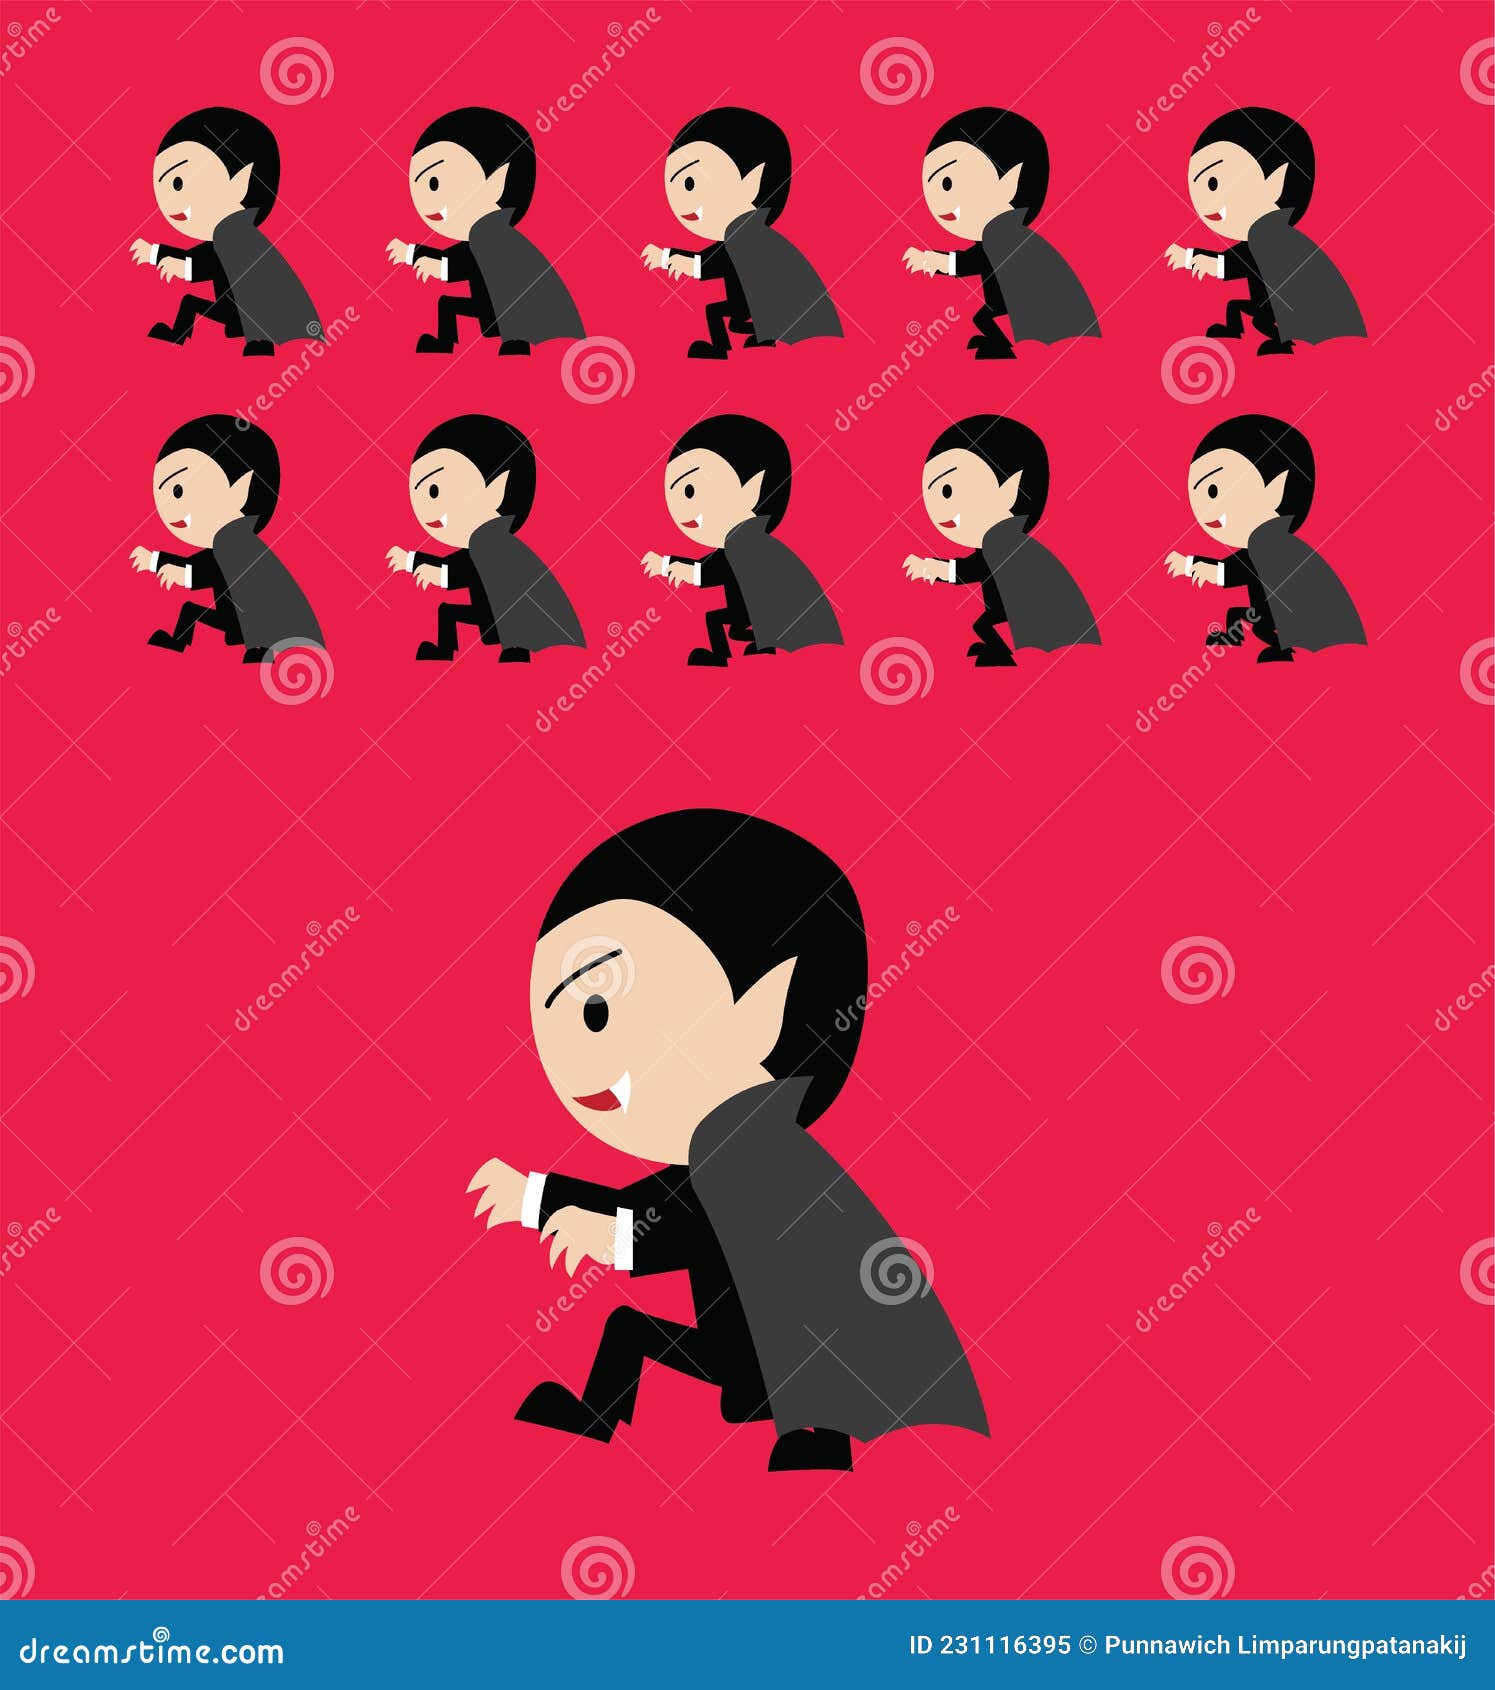 Animate Characters Stock Illustrations – 62 Animate Characters Stock  Illustrations, Vectors & Clipart - Dreamstime